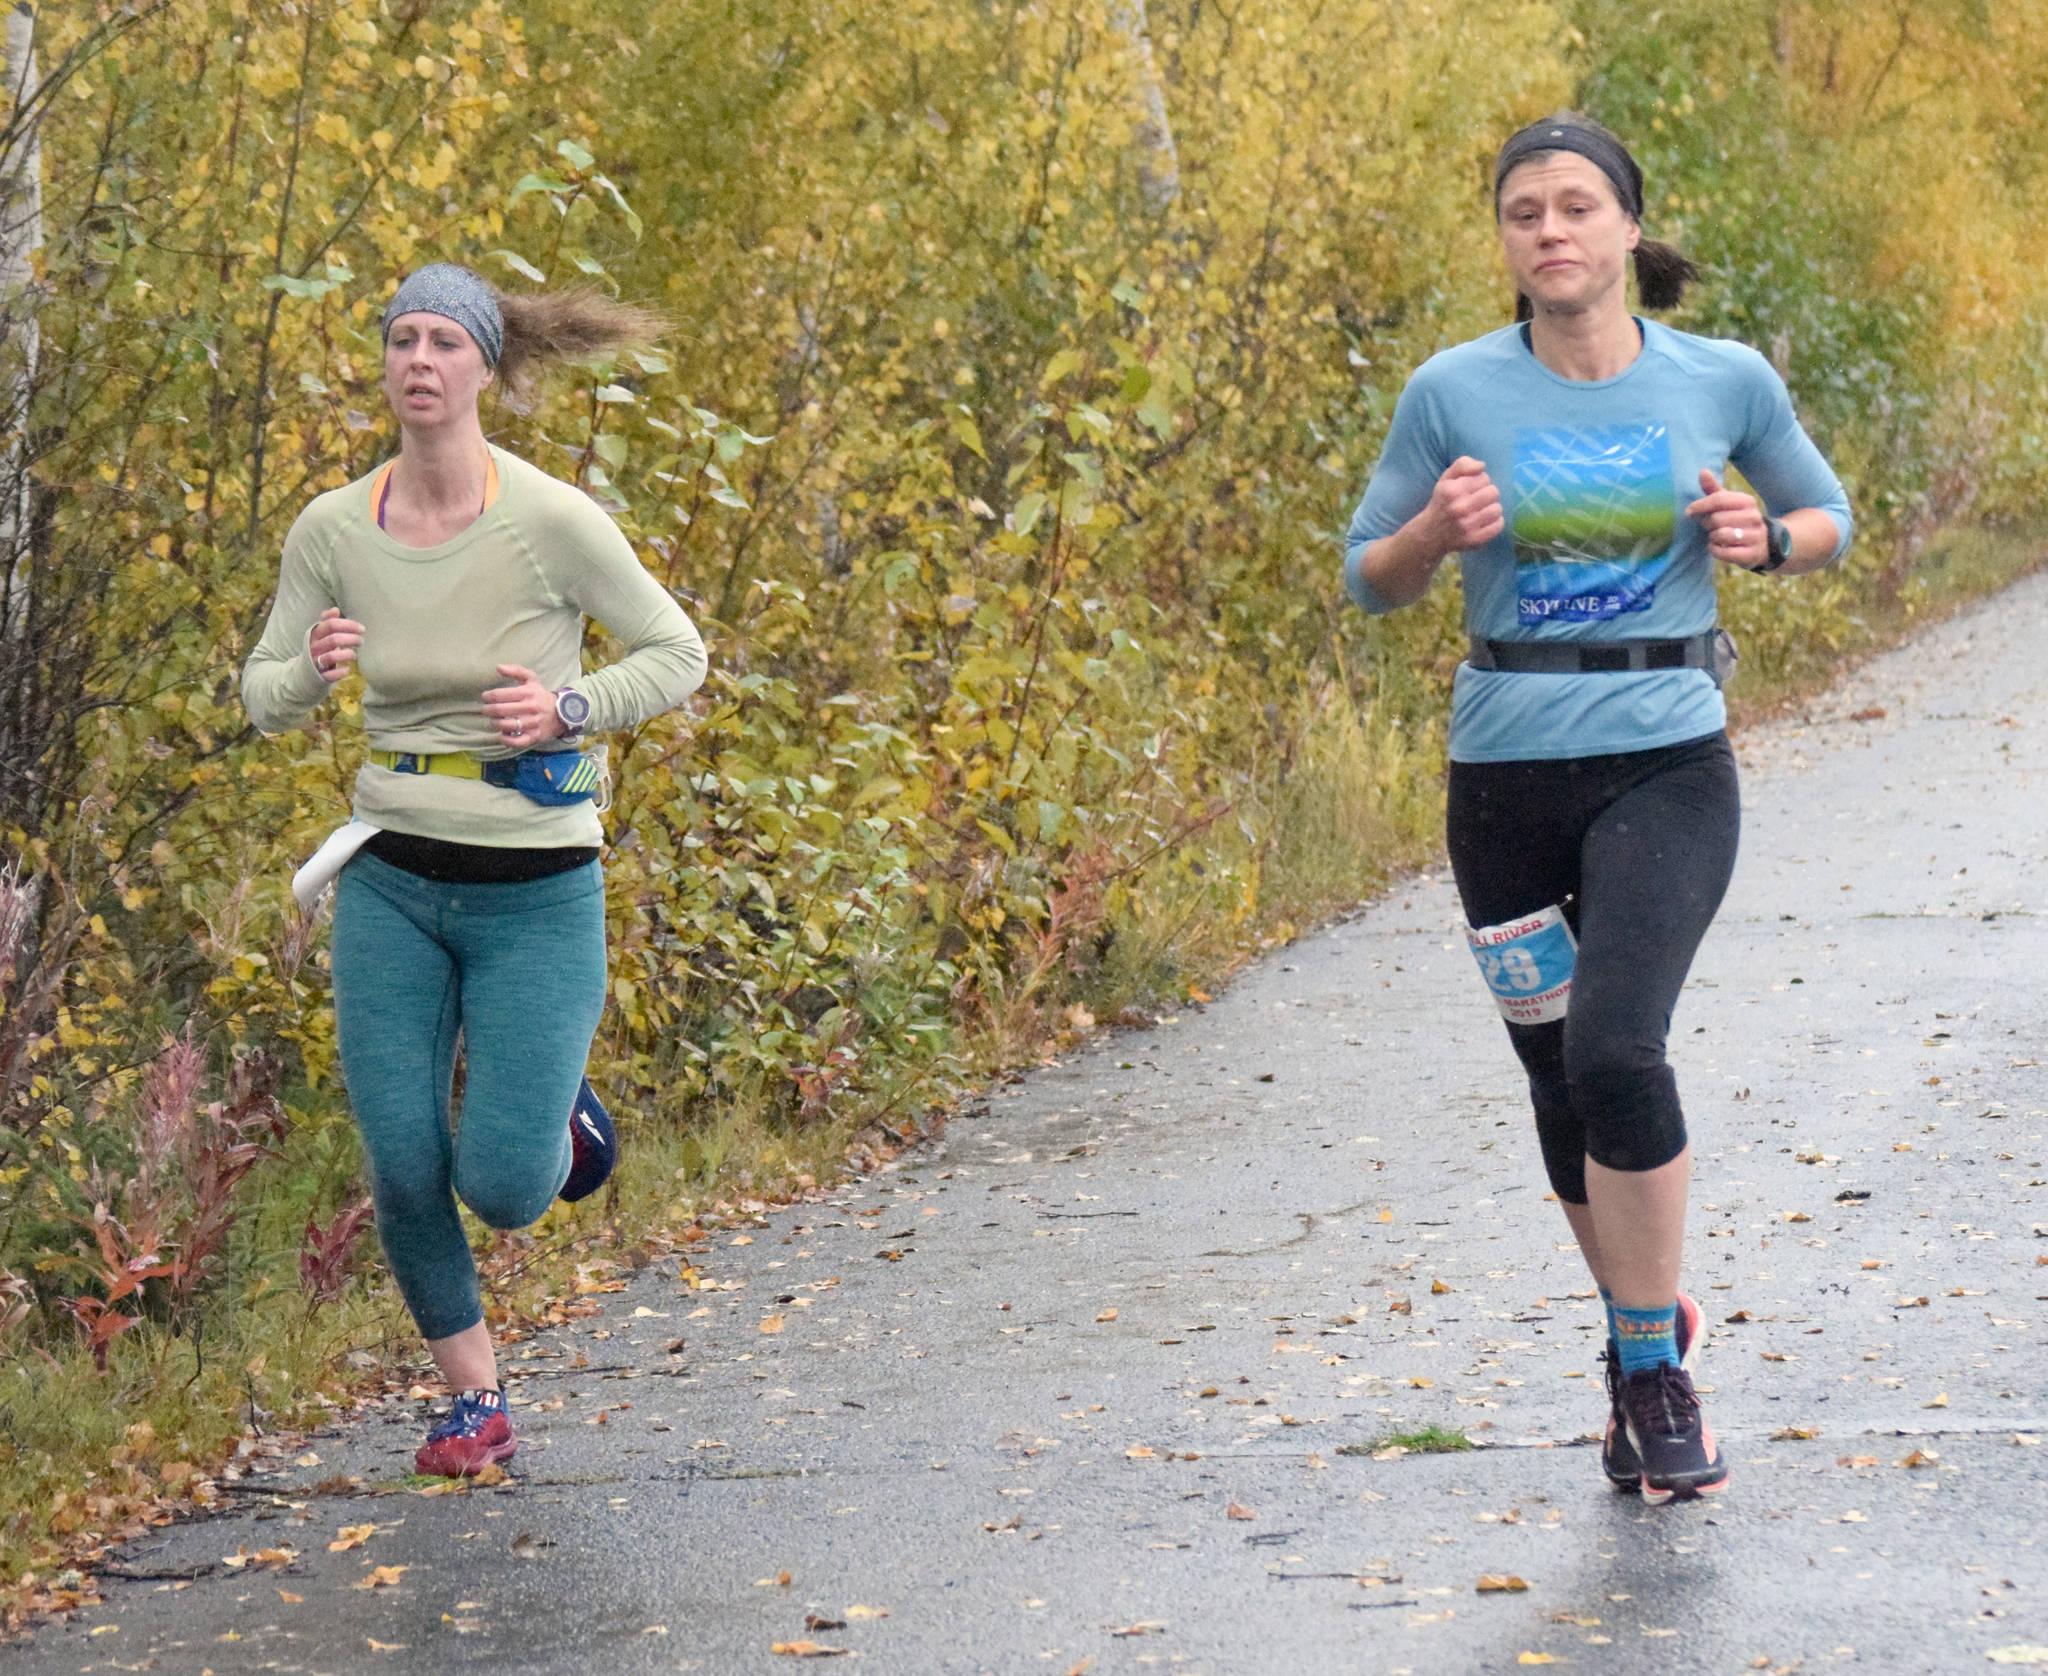 Homer’s Elizabeth Roedl and Homer’s Stacey Buckelew compete in the Kenai River Marathon on Sunday, Sept. 29, 2019, in Alaska. Buckelew won the Marathon, while Roedl was second. (Photo by Jeff Helminiak/Peninsula Clarion)